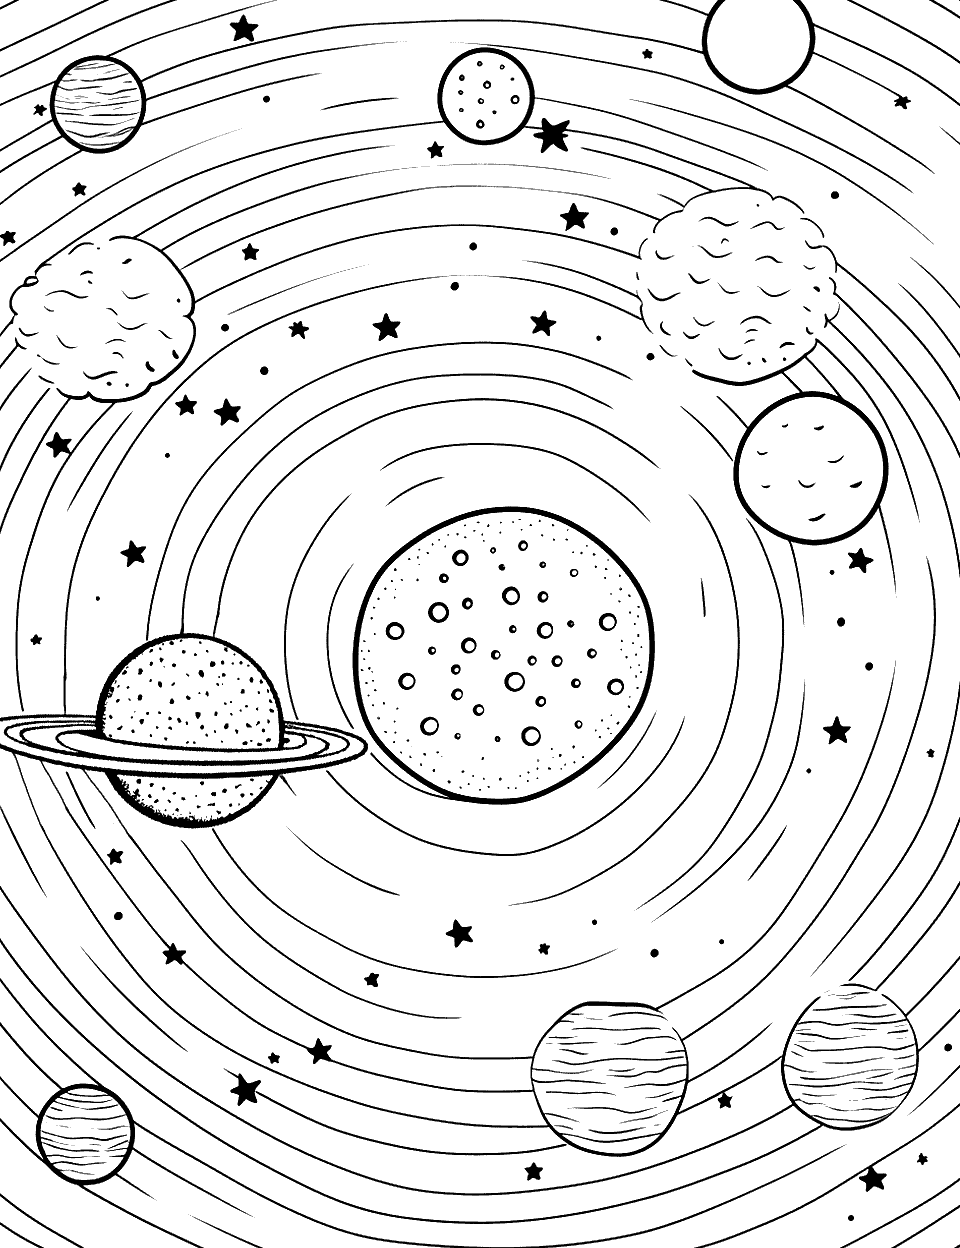 Milky Way Galaxy Solar System Coloring Page - The Milky Way galaxy with a clear view of its spiral arms.